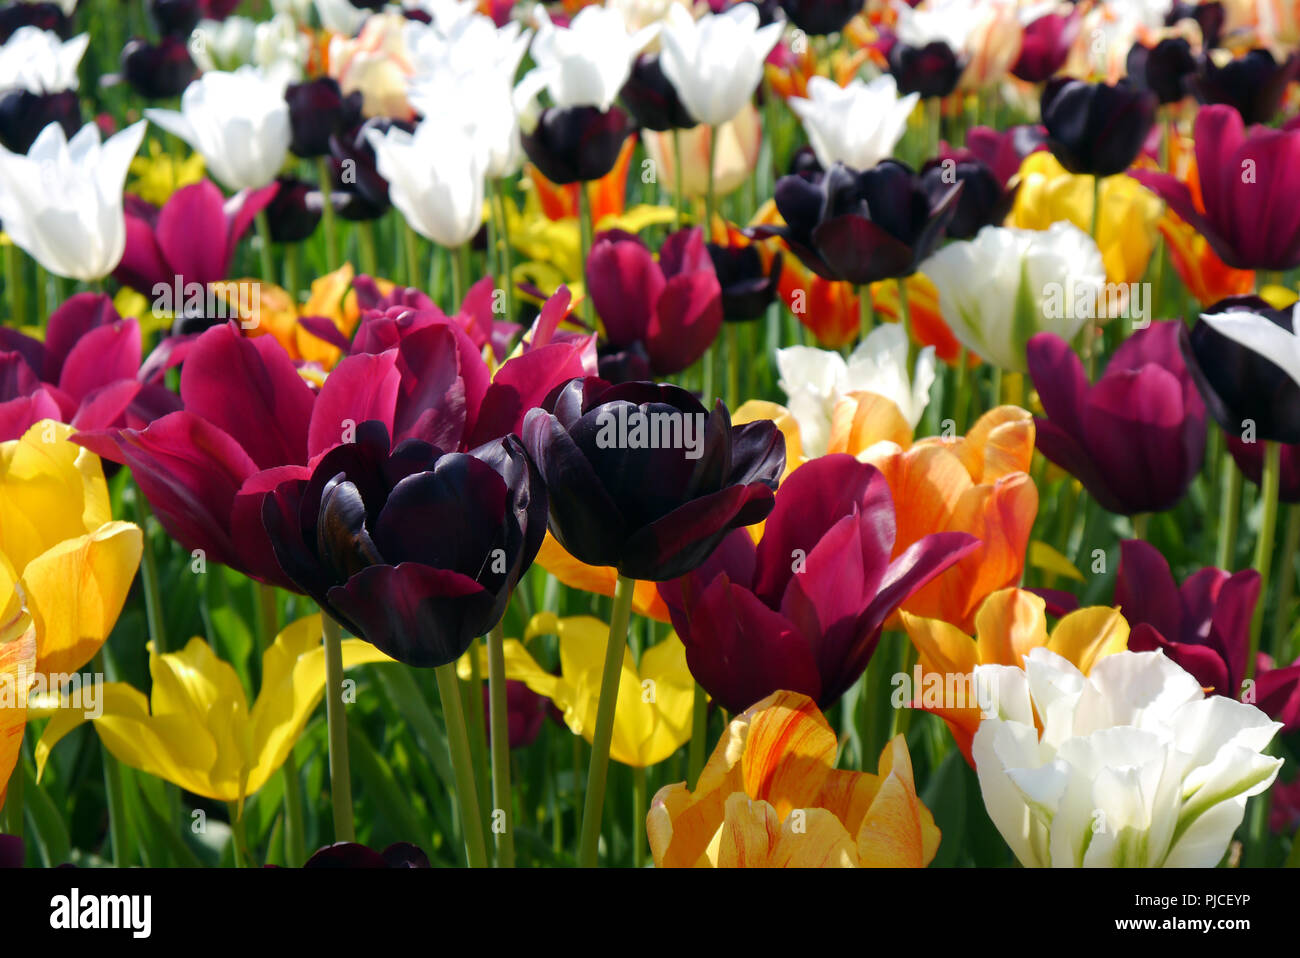 A Colourful Border of Mixed Tulips on Display at RHS Garden Harlow Carr, Harrogate, Yorkshire. England, UK. Stock Photo